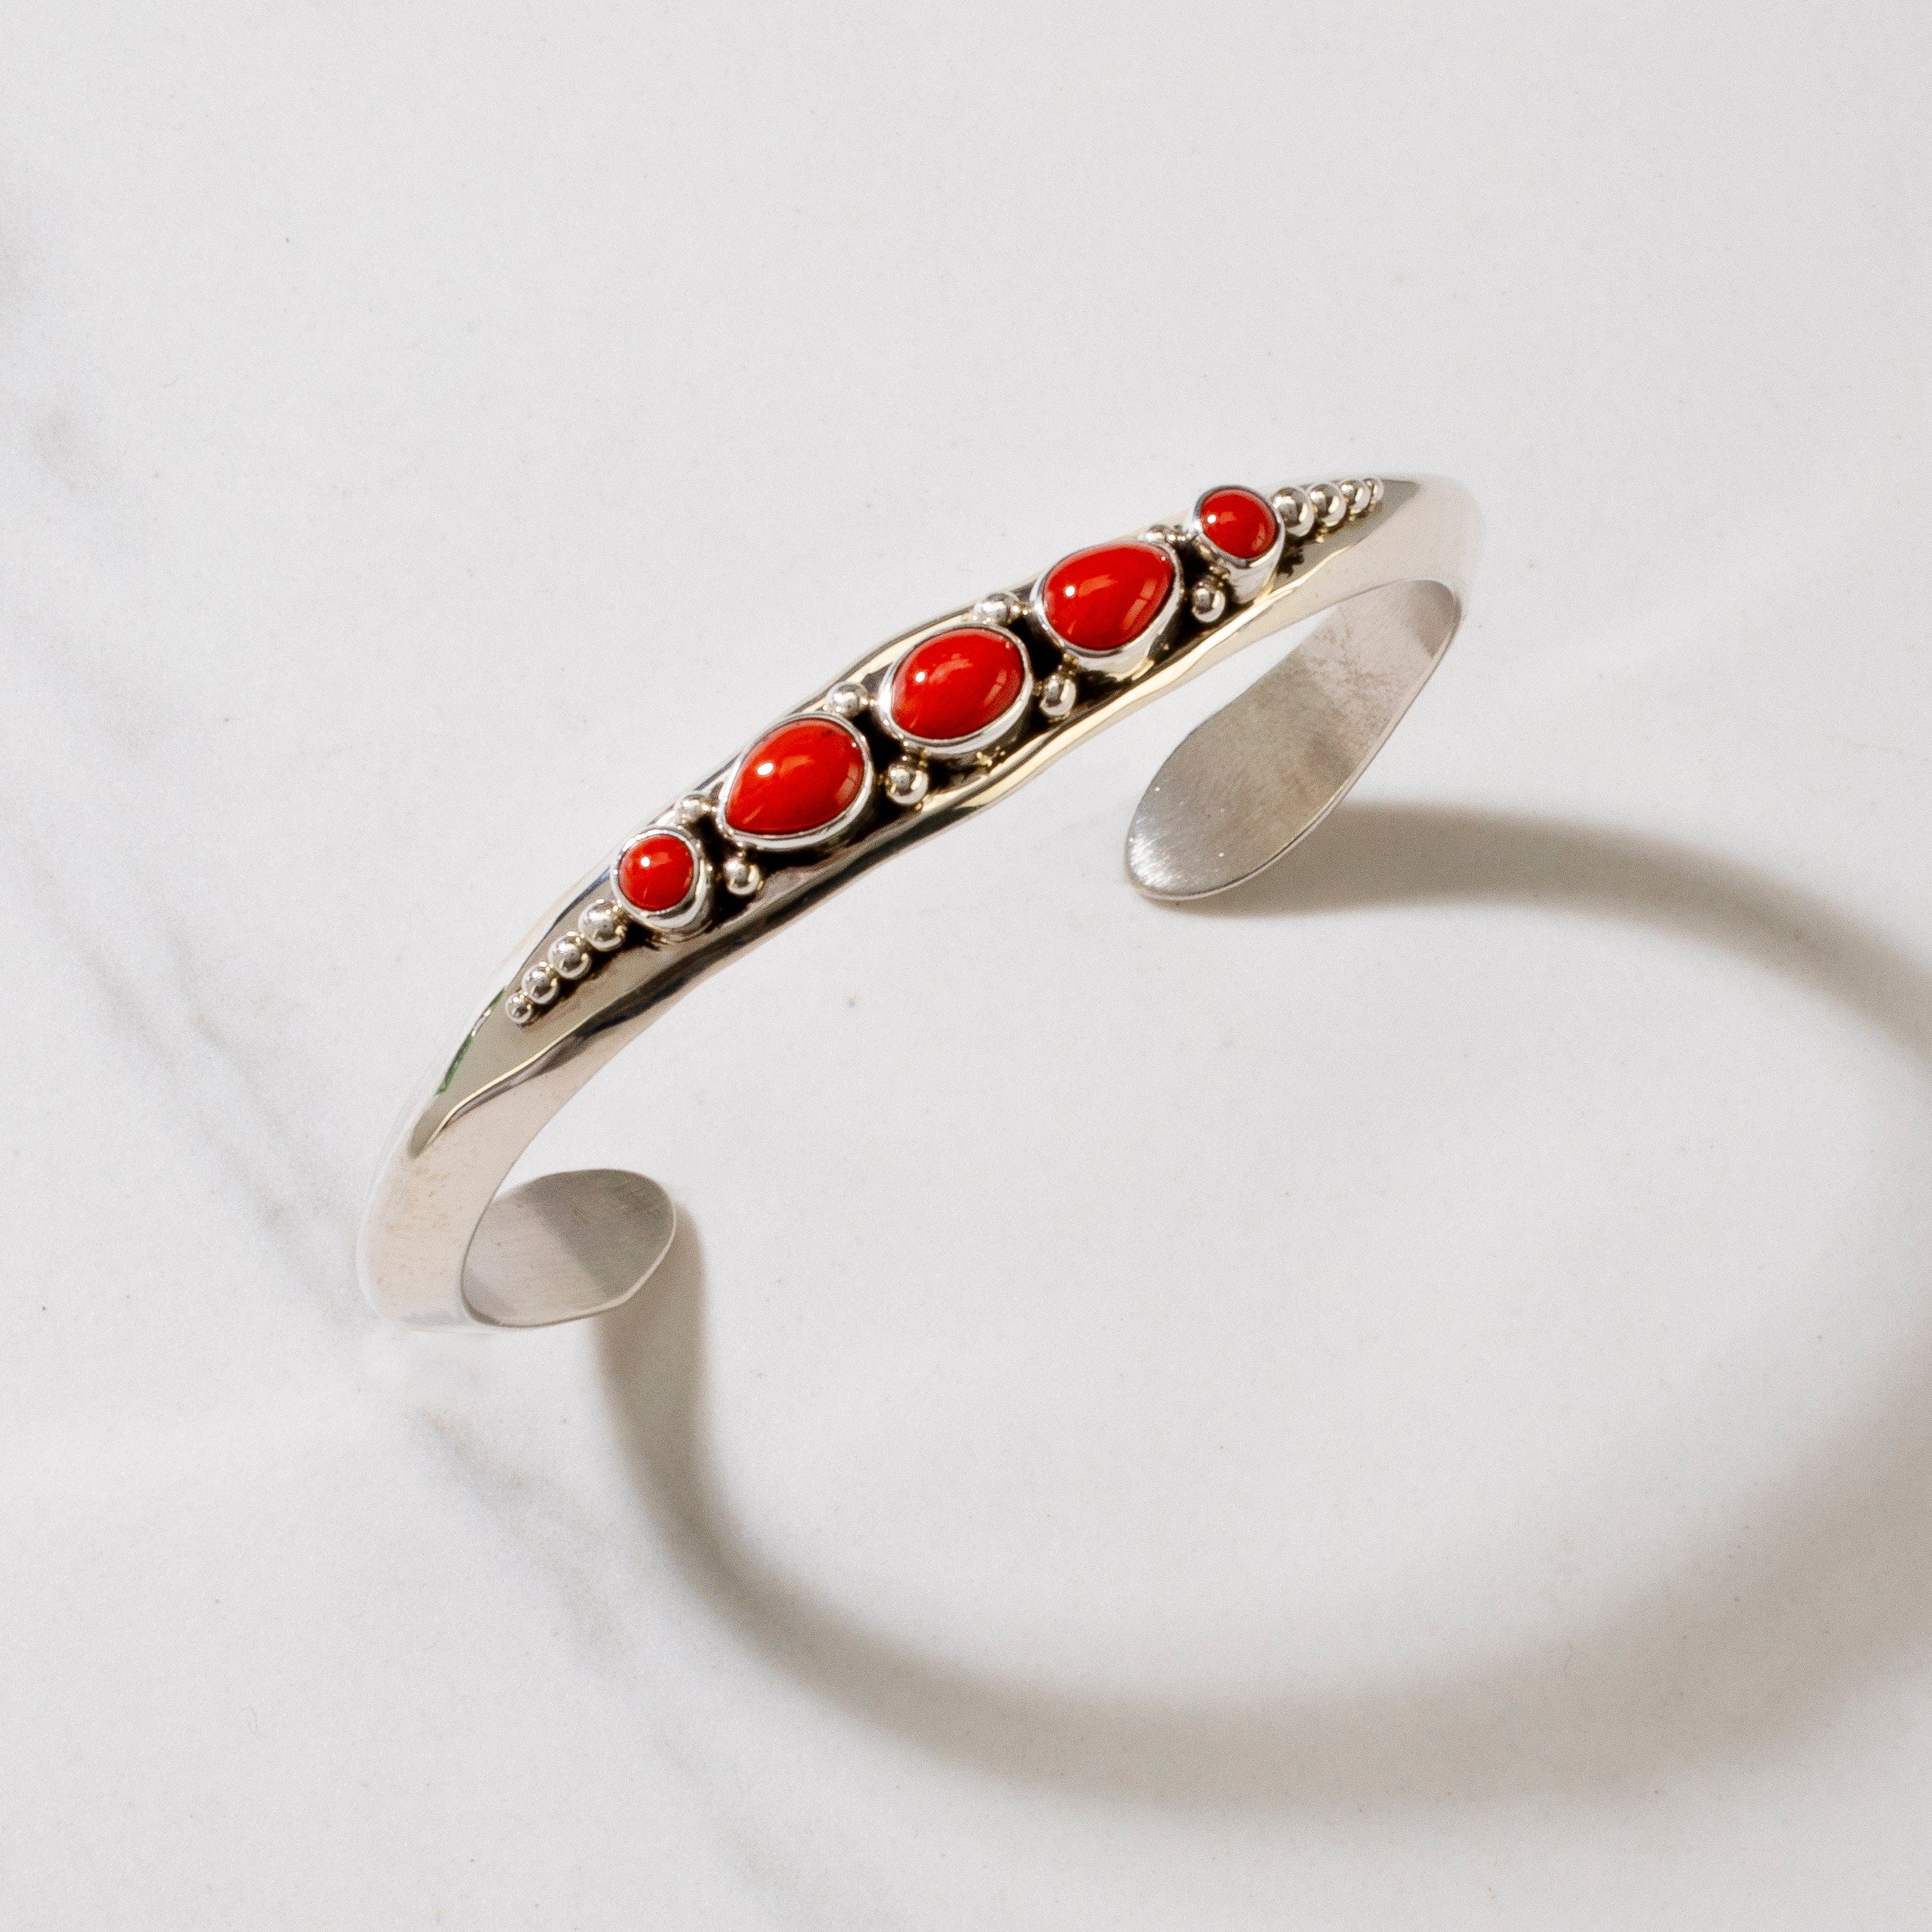 Kalifano Native American Jewelry Russell Sam Navajo Red Coral USA Native American Made 925 Sterling Silver Cuff NAB1000.010